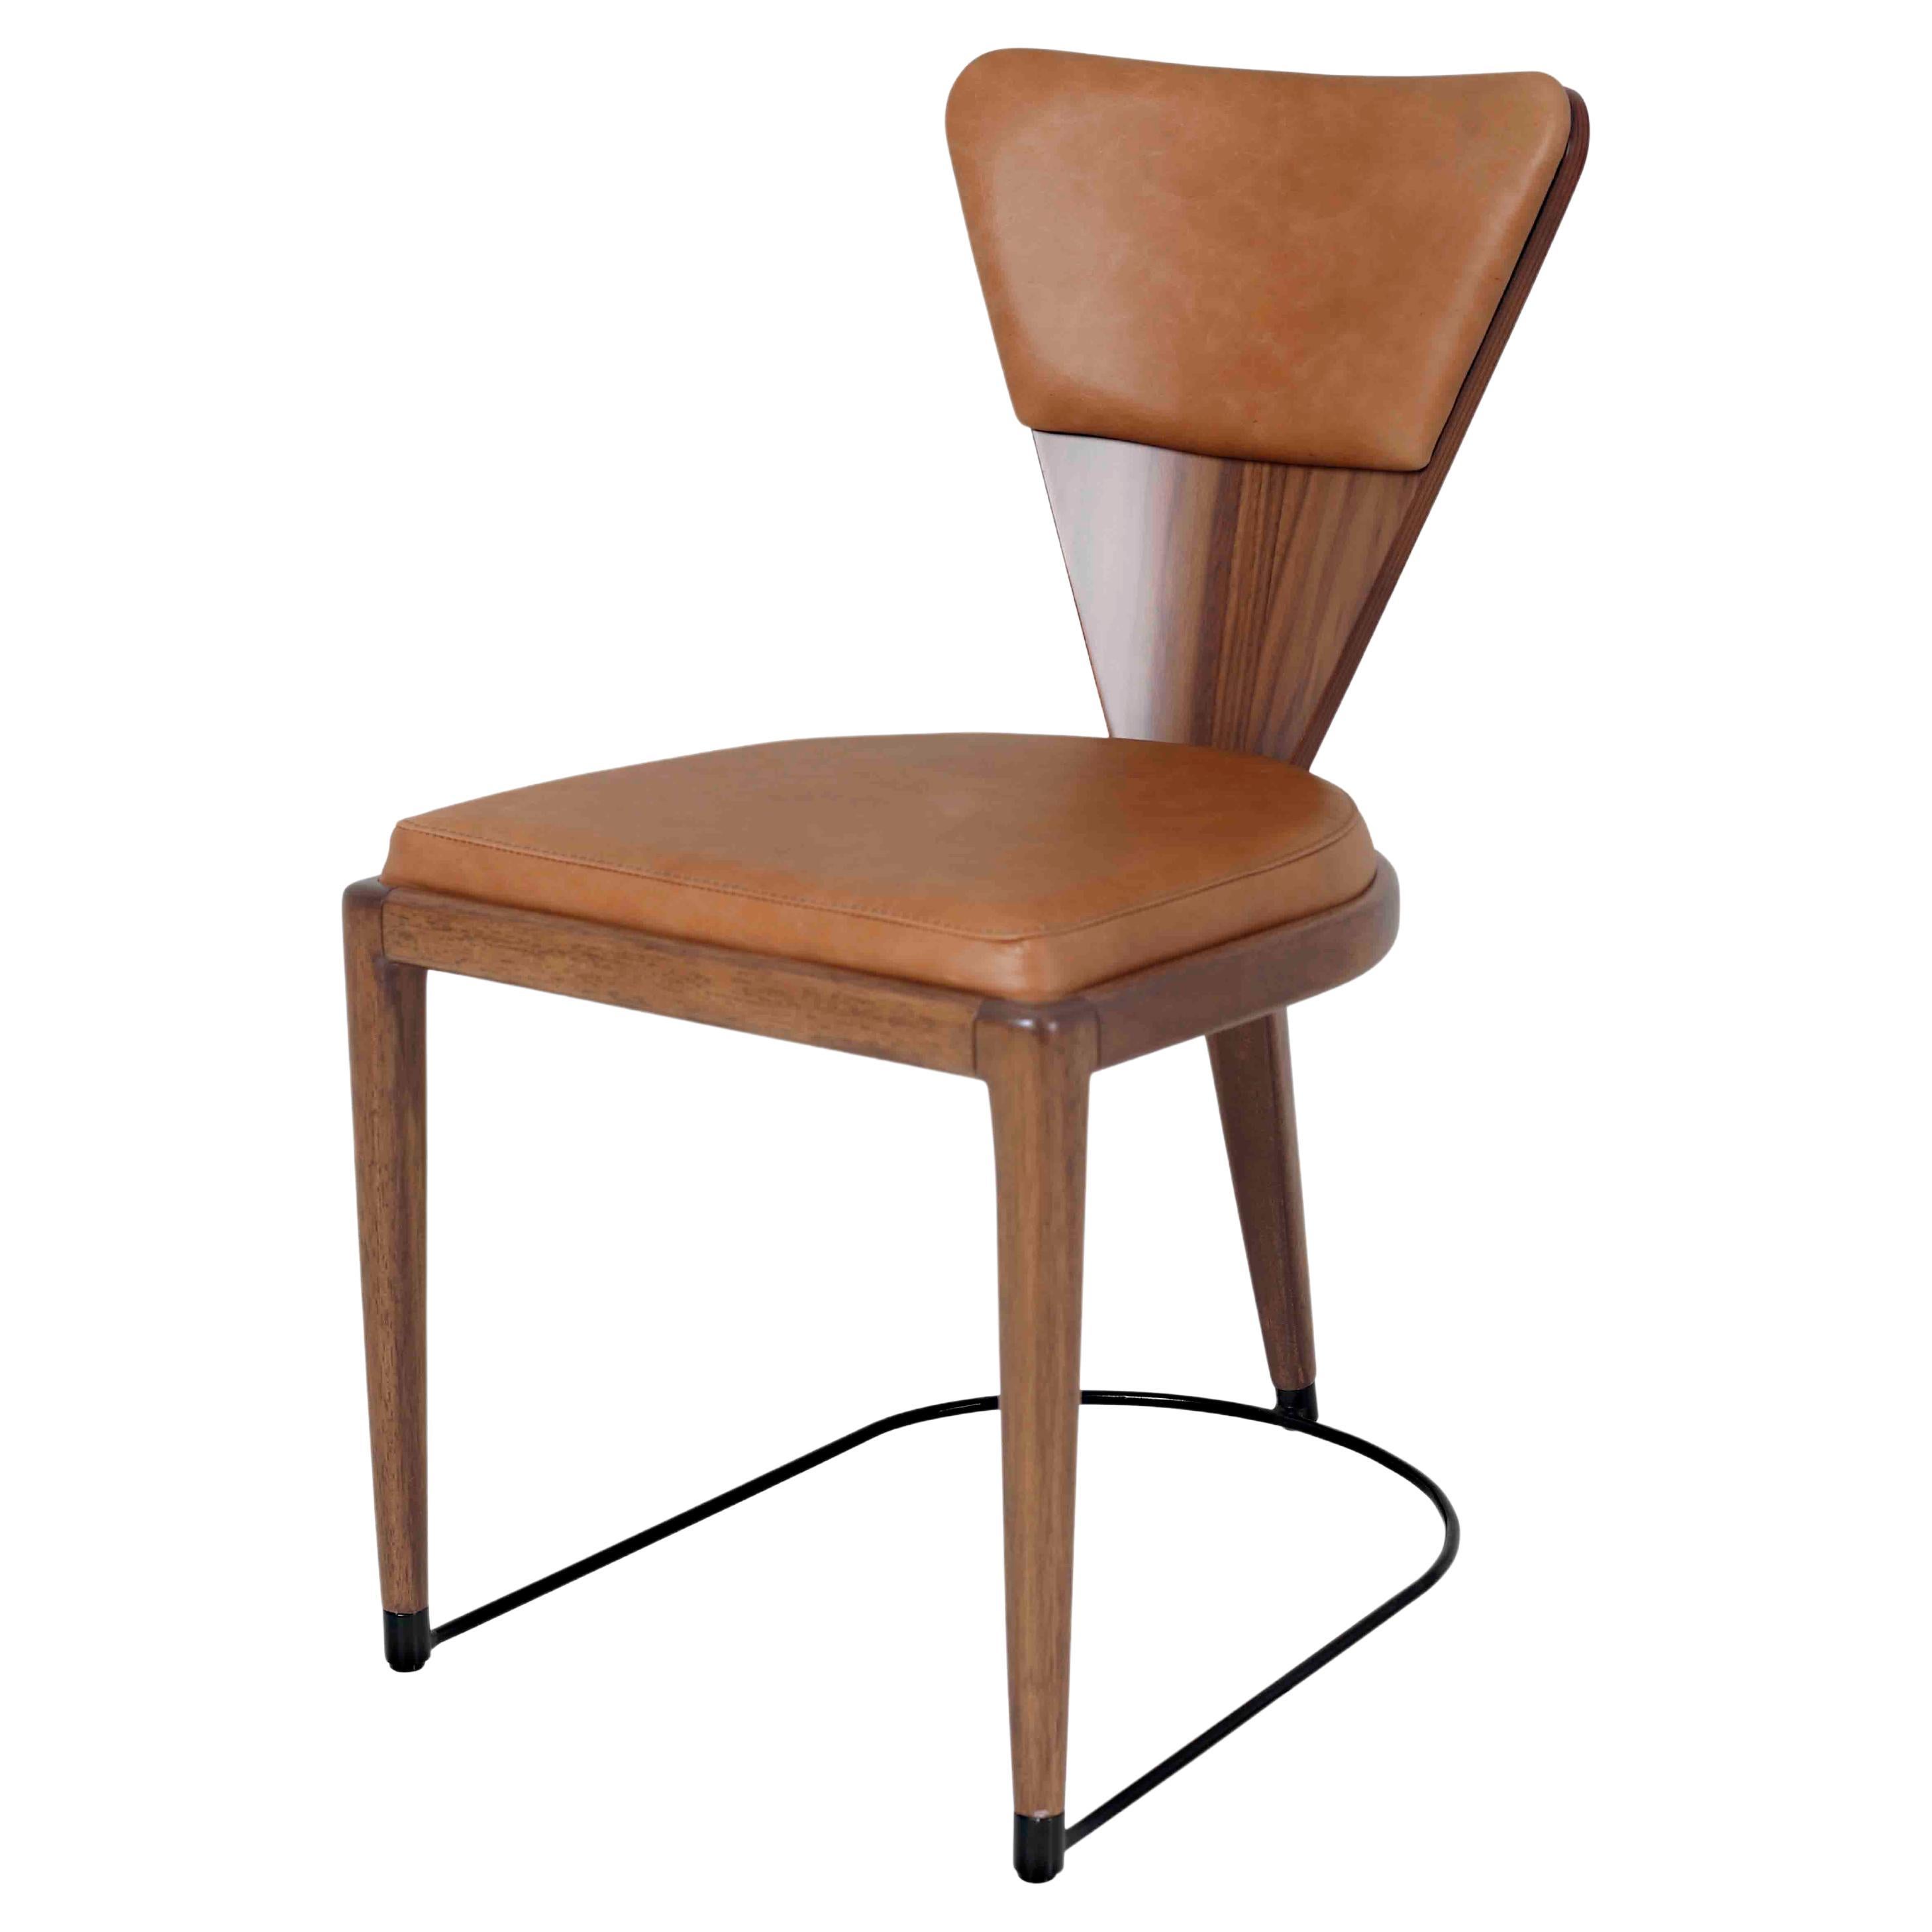 Carbon Steel Foot, Leather Seat and Backrest, Dining Chair Fish For Sale